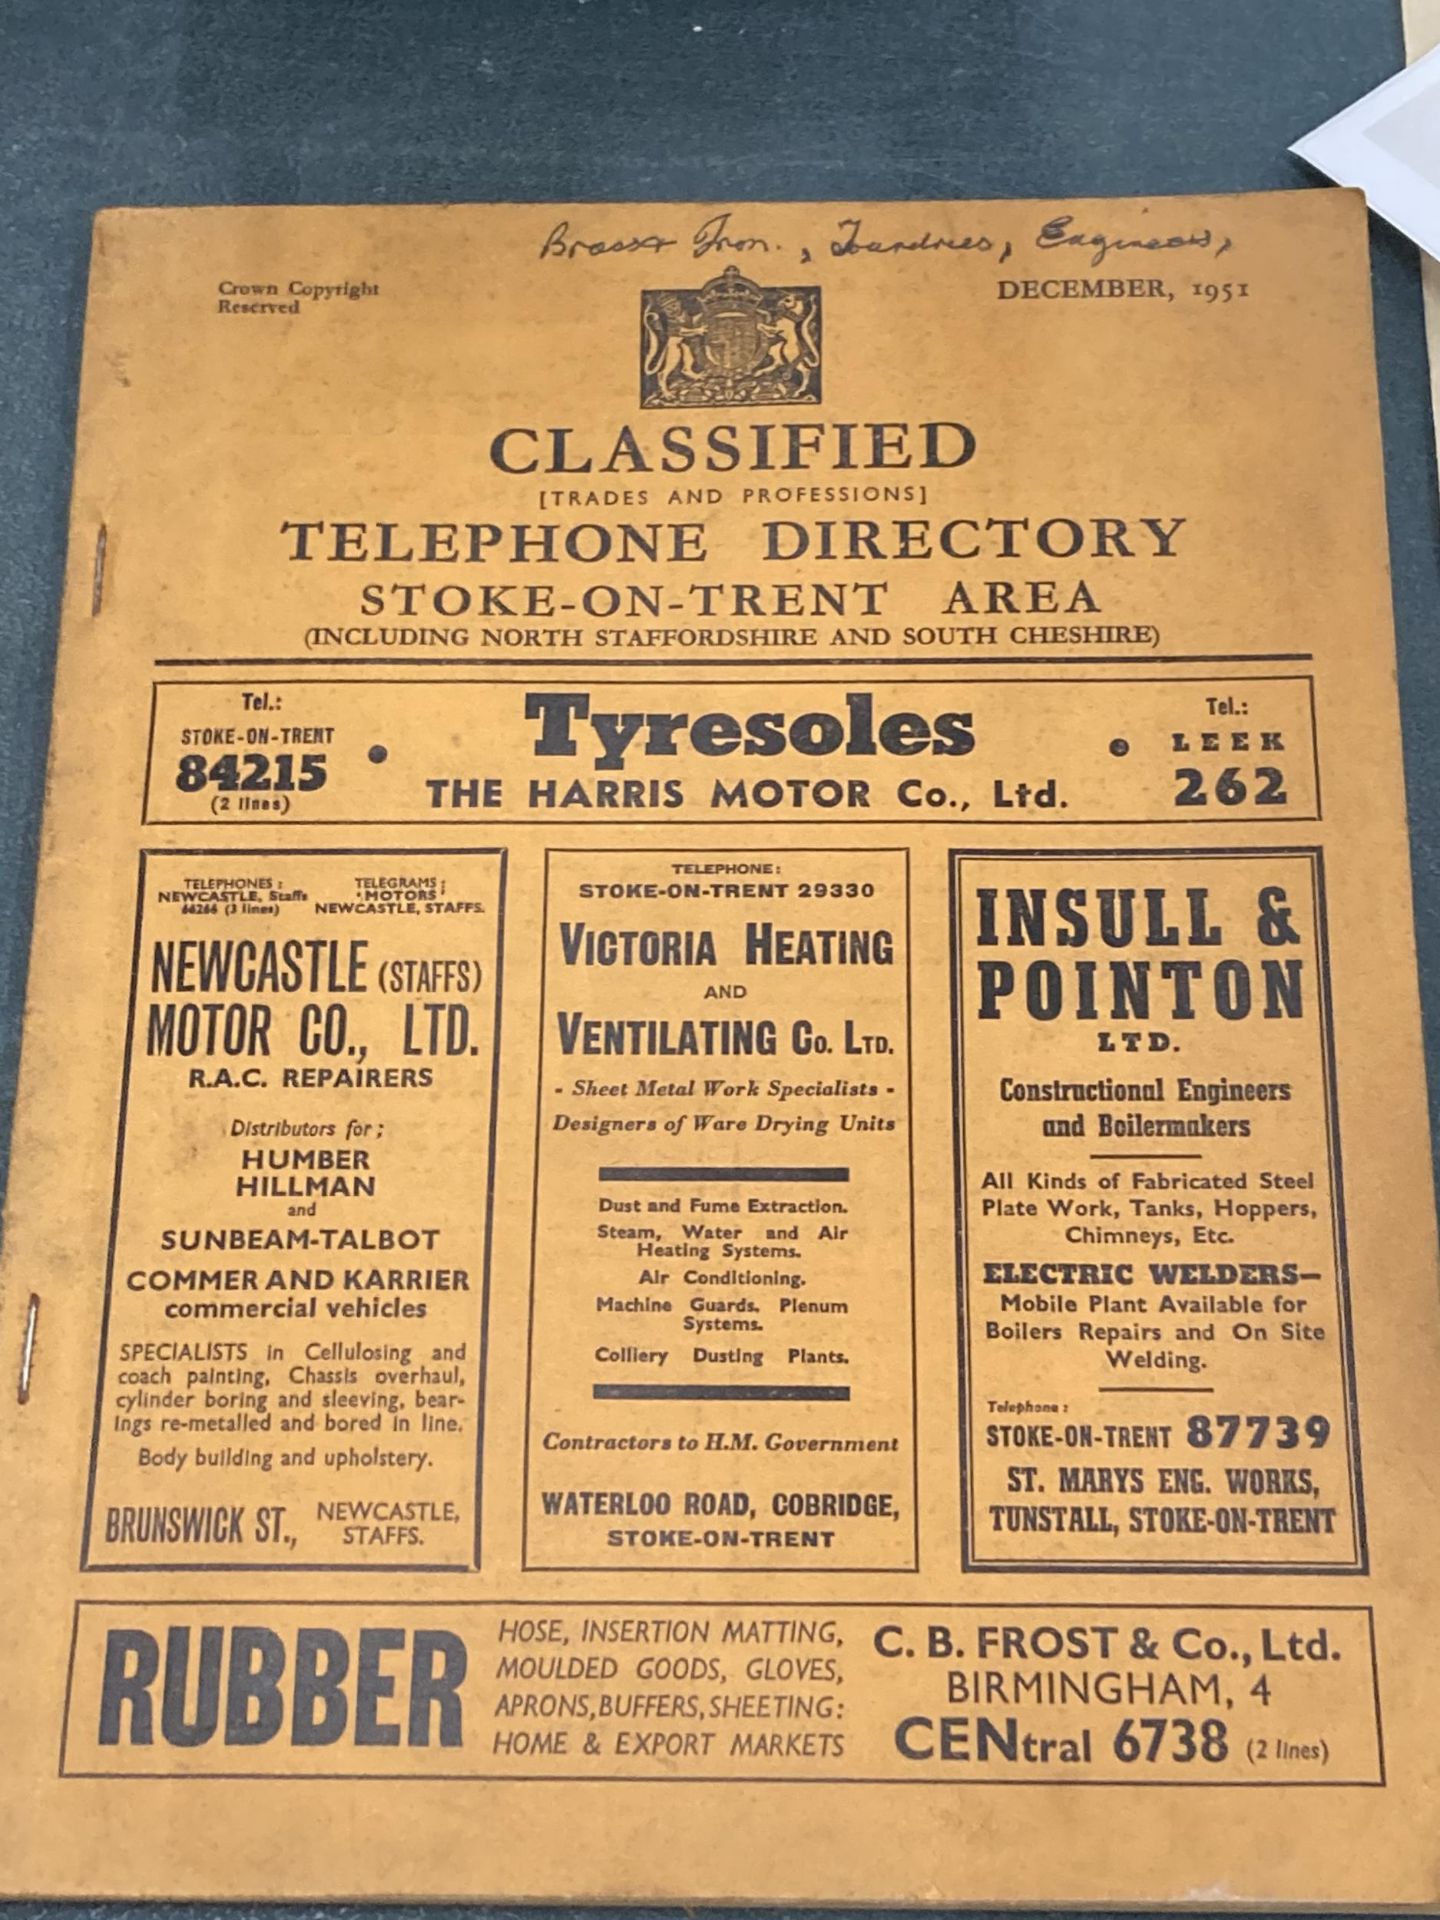 A VINTAGE 1951 STOKE ON TRENT TELEPHONE DICTIONARY